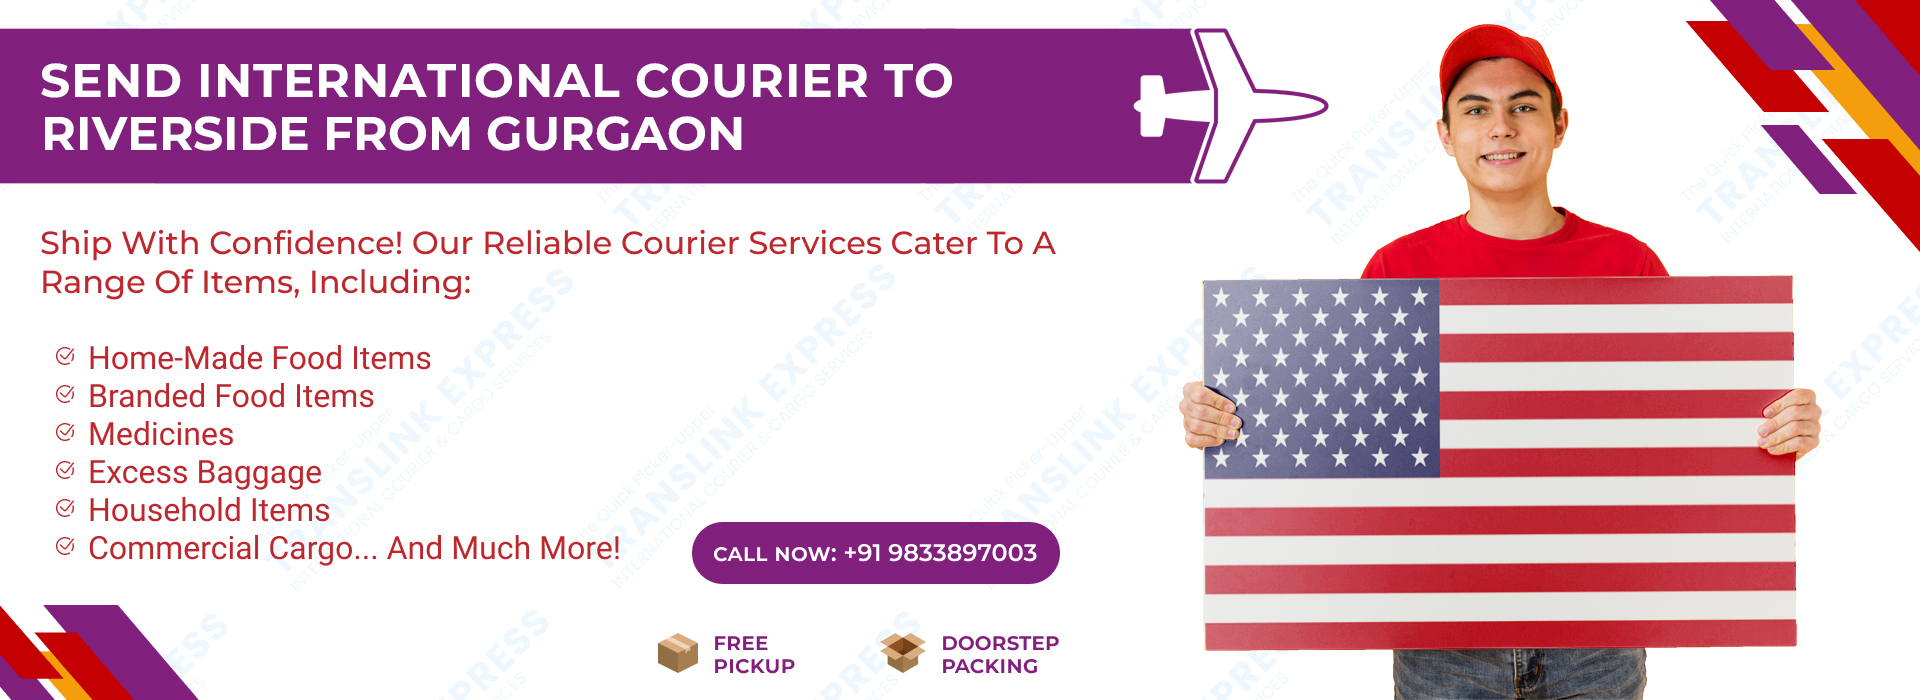 Courier to Riverside From Gurgaon